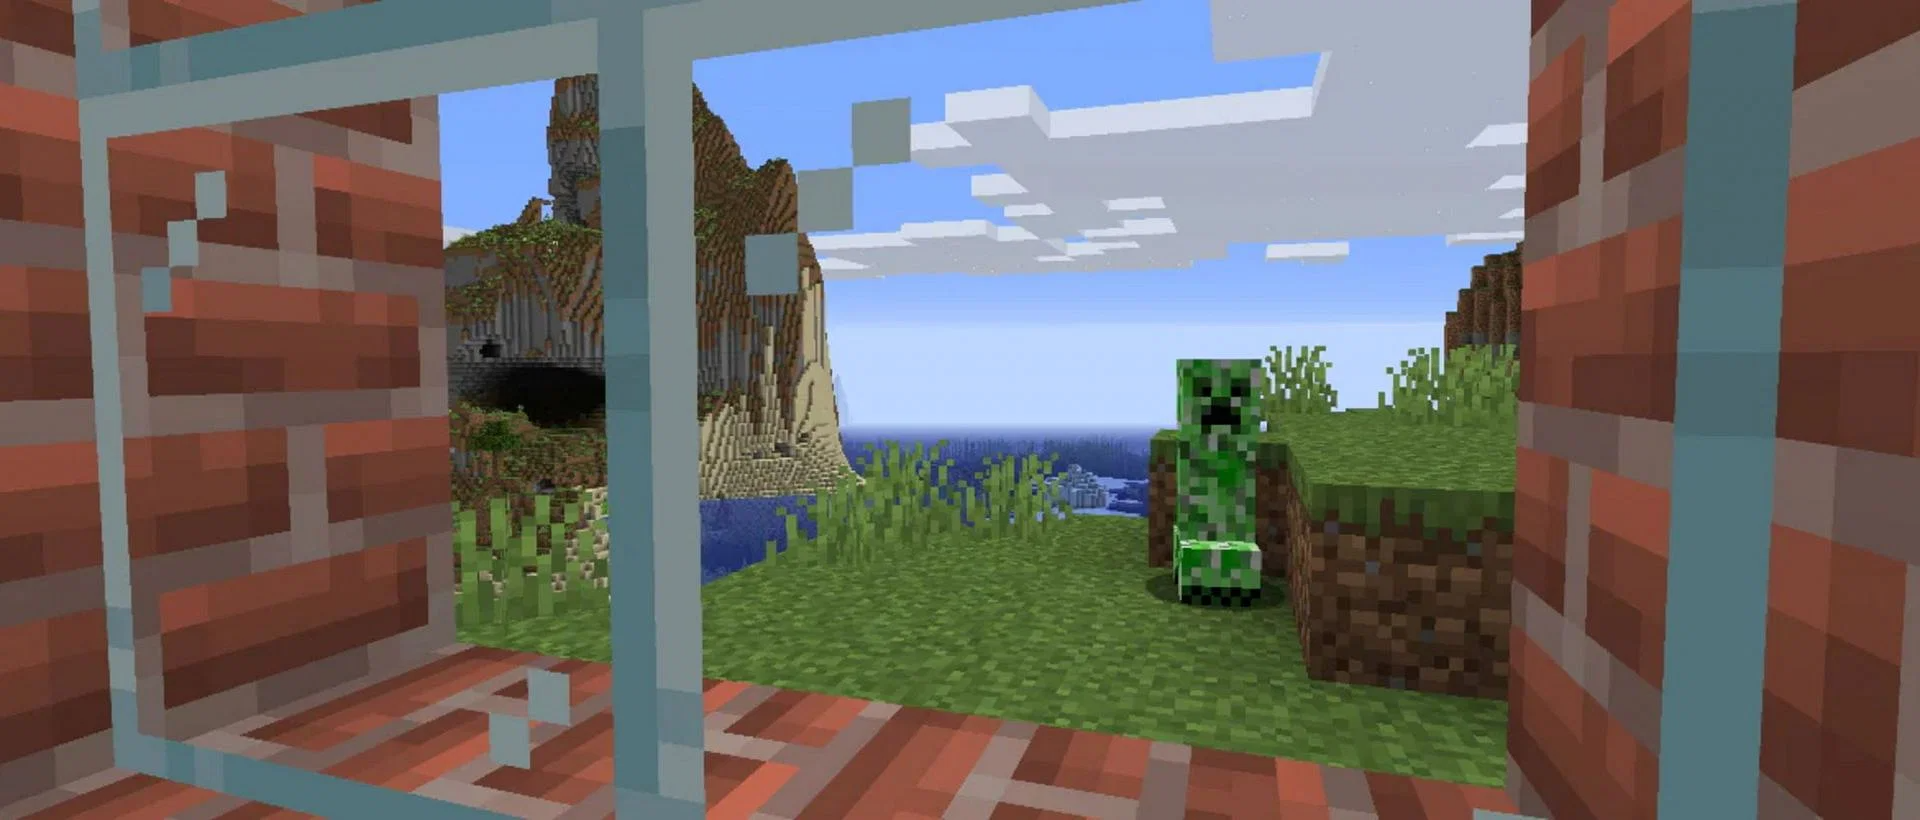 Uses of Glass in Minecraft